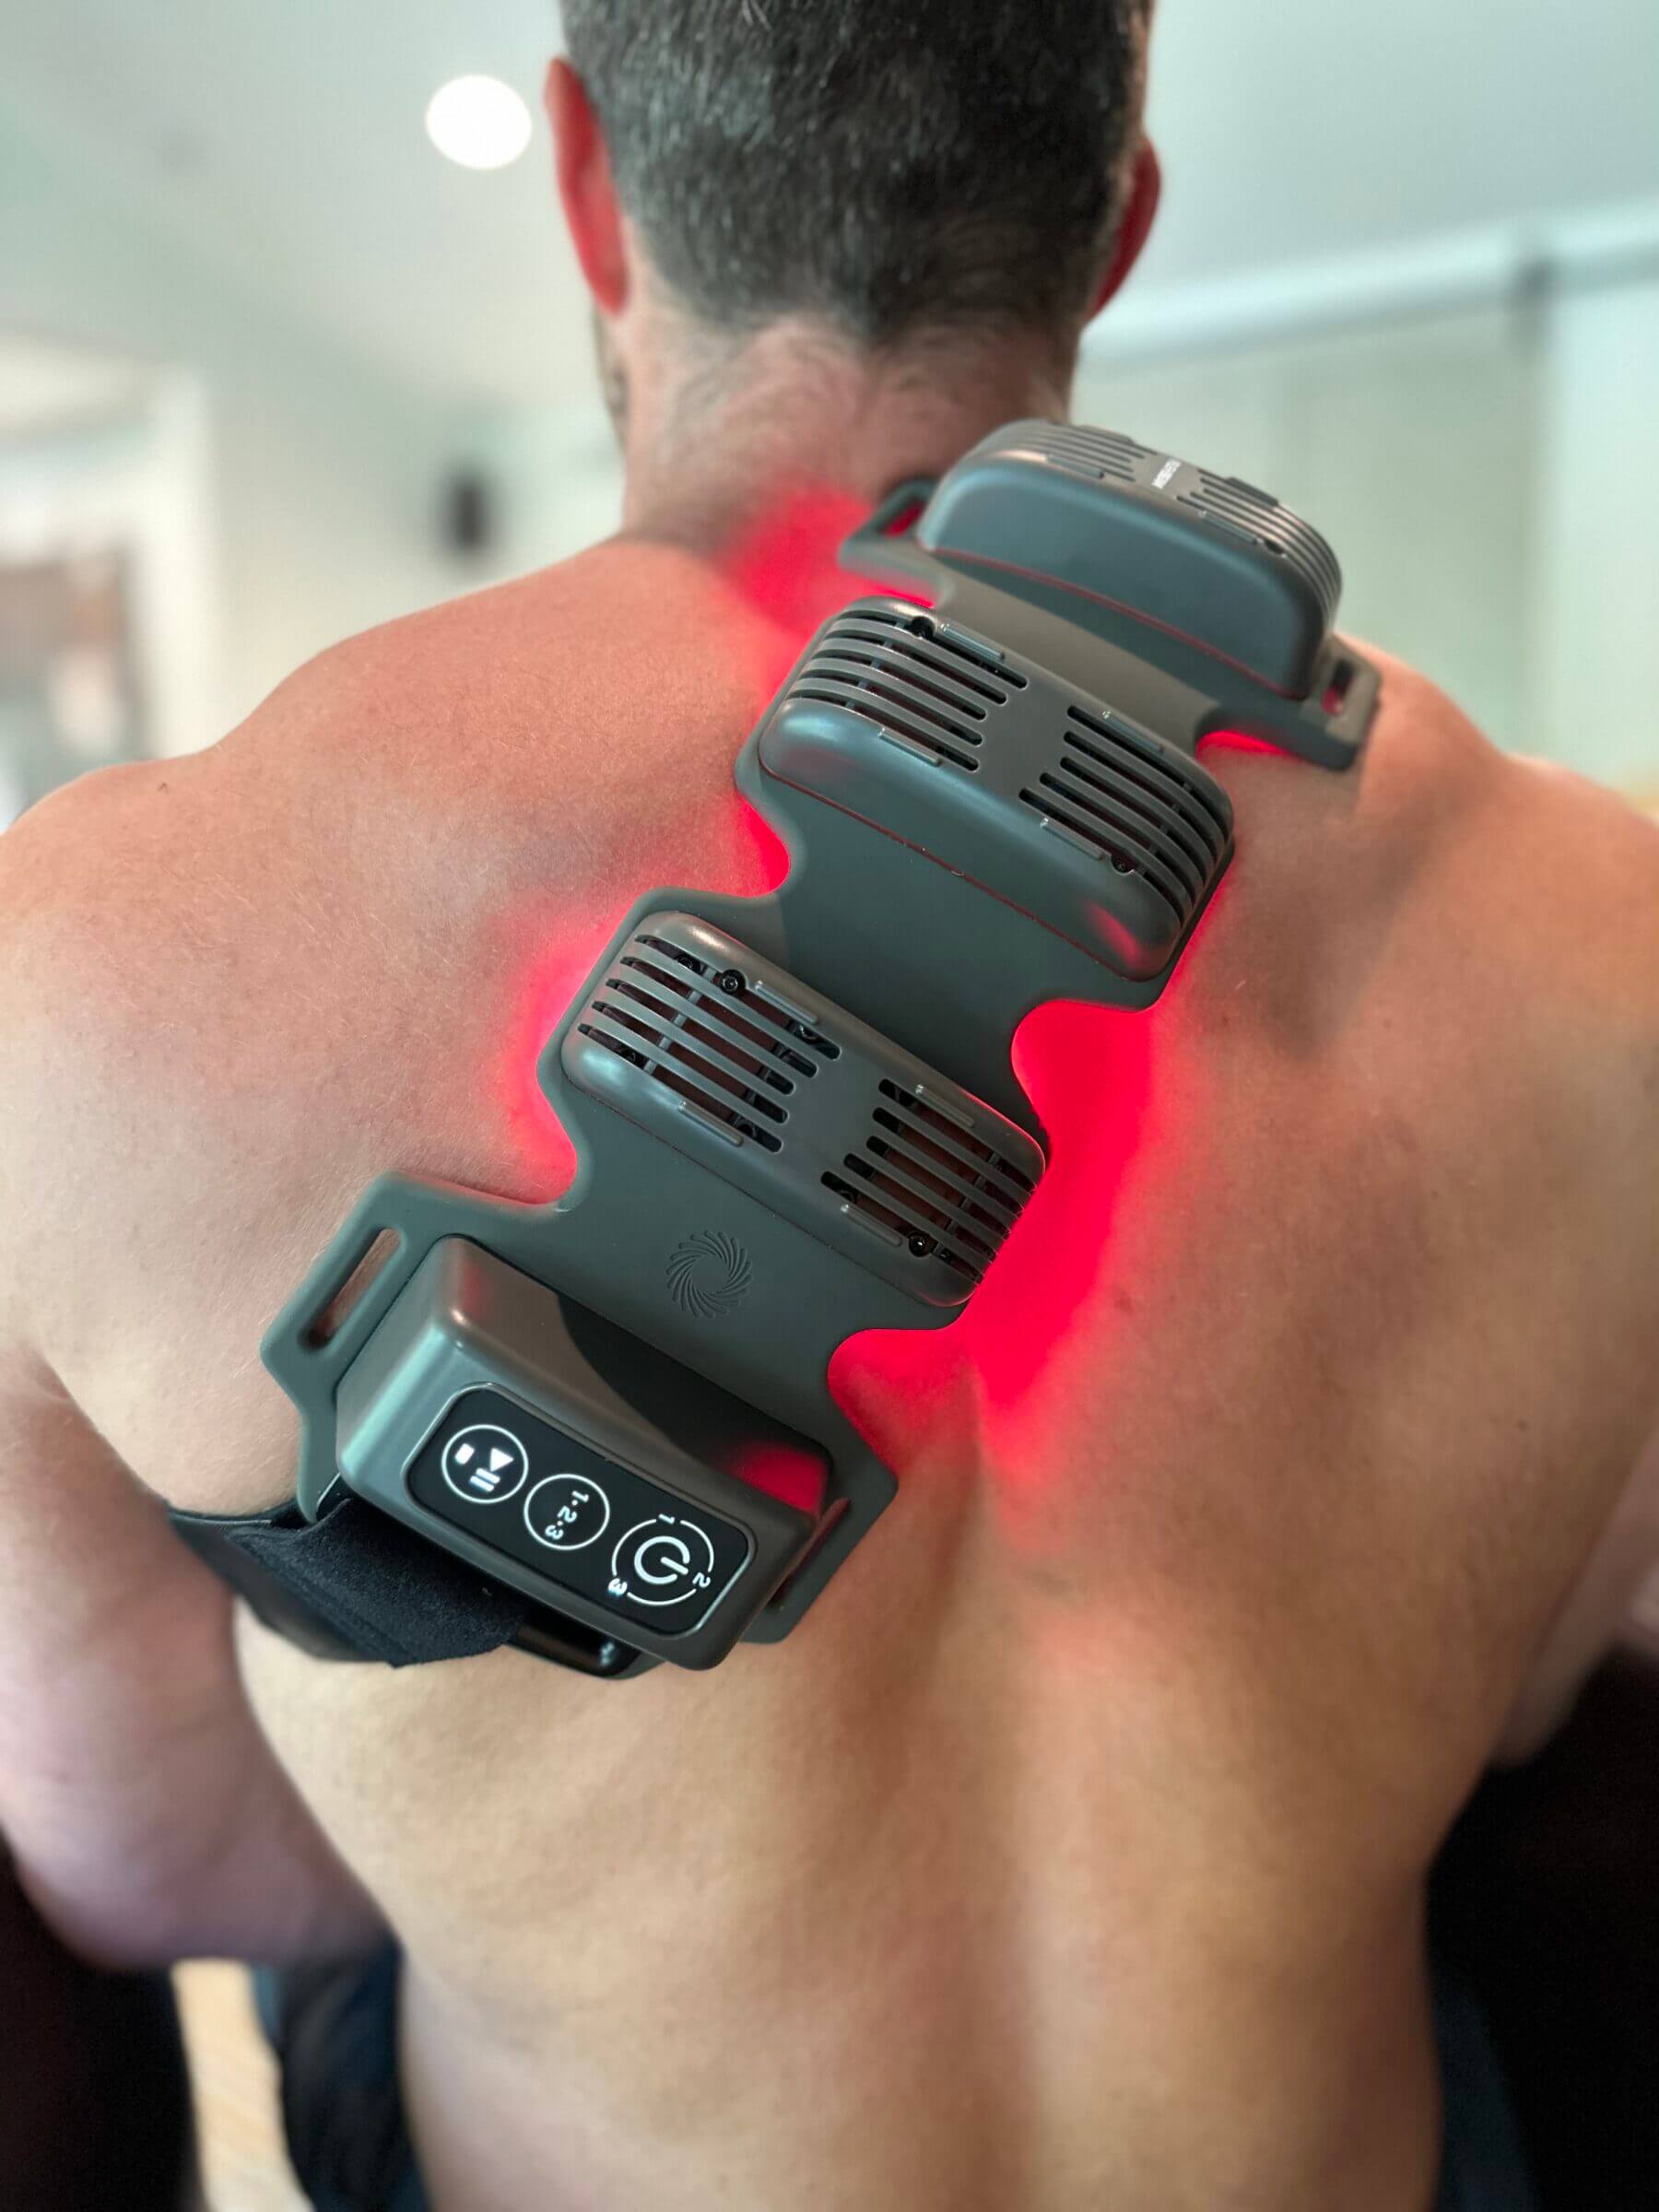 The FlexBEAM is a good general-wellness device I've used to treat sore muscles